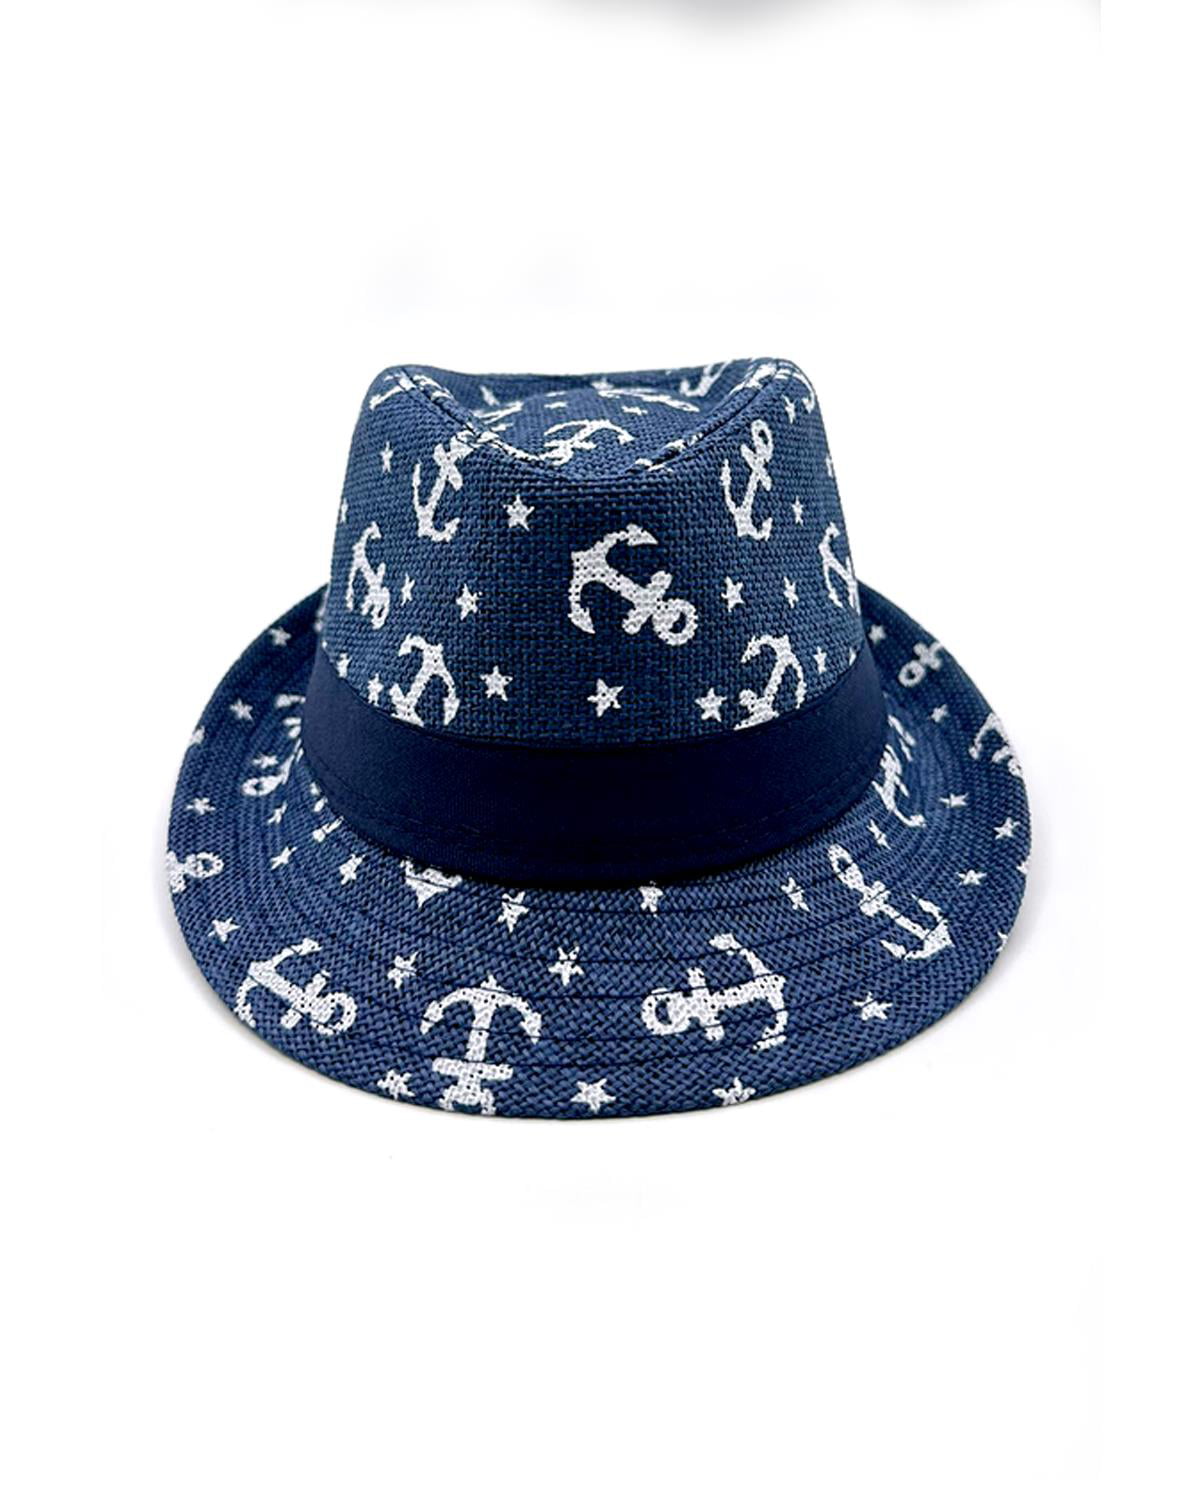 Kids Summer Straw Anchor Hat for Toddler Boys Fedora Beach Sun Hat, Navy  Anchor, Size: One Size, Lucky 7